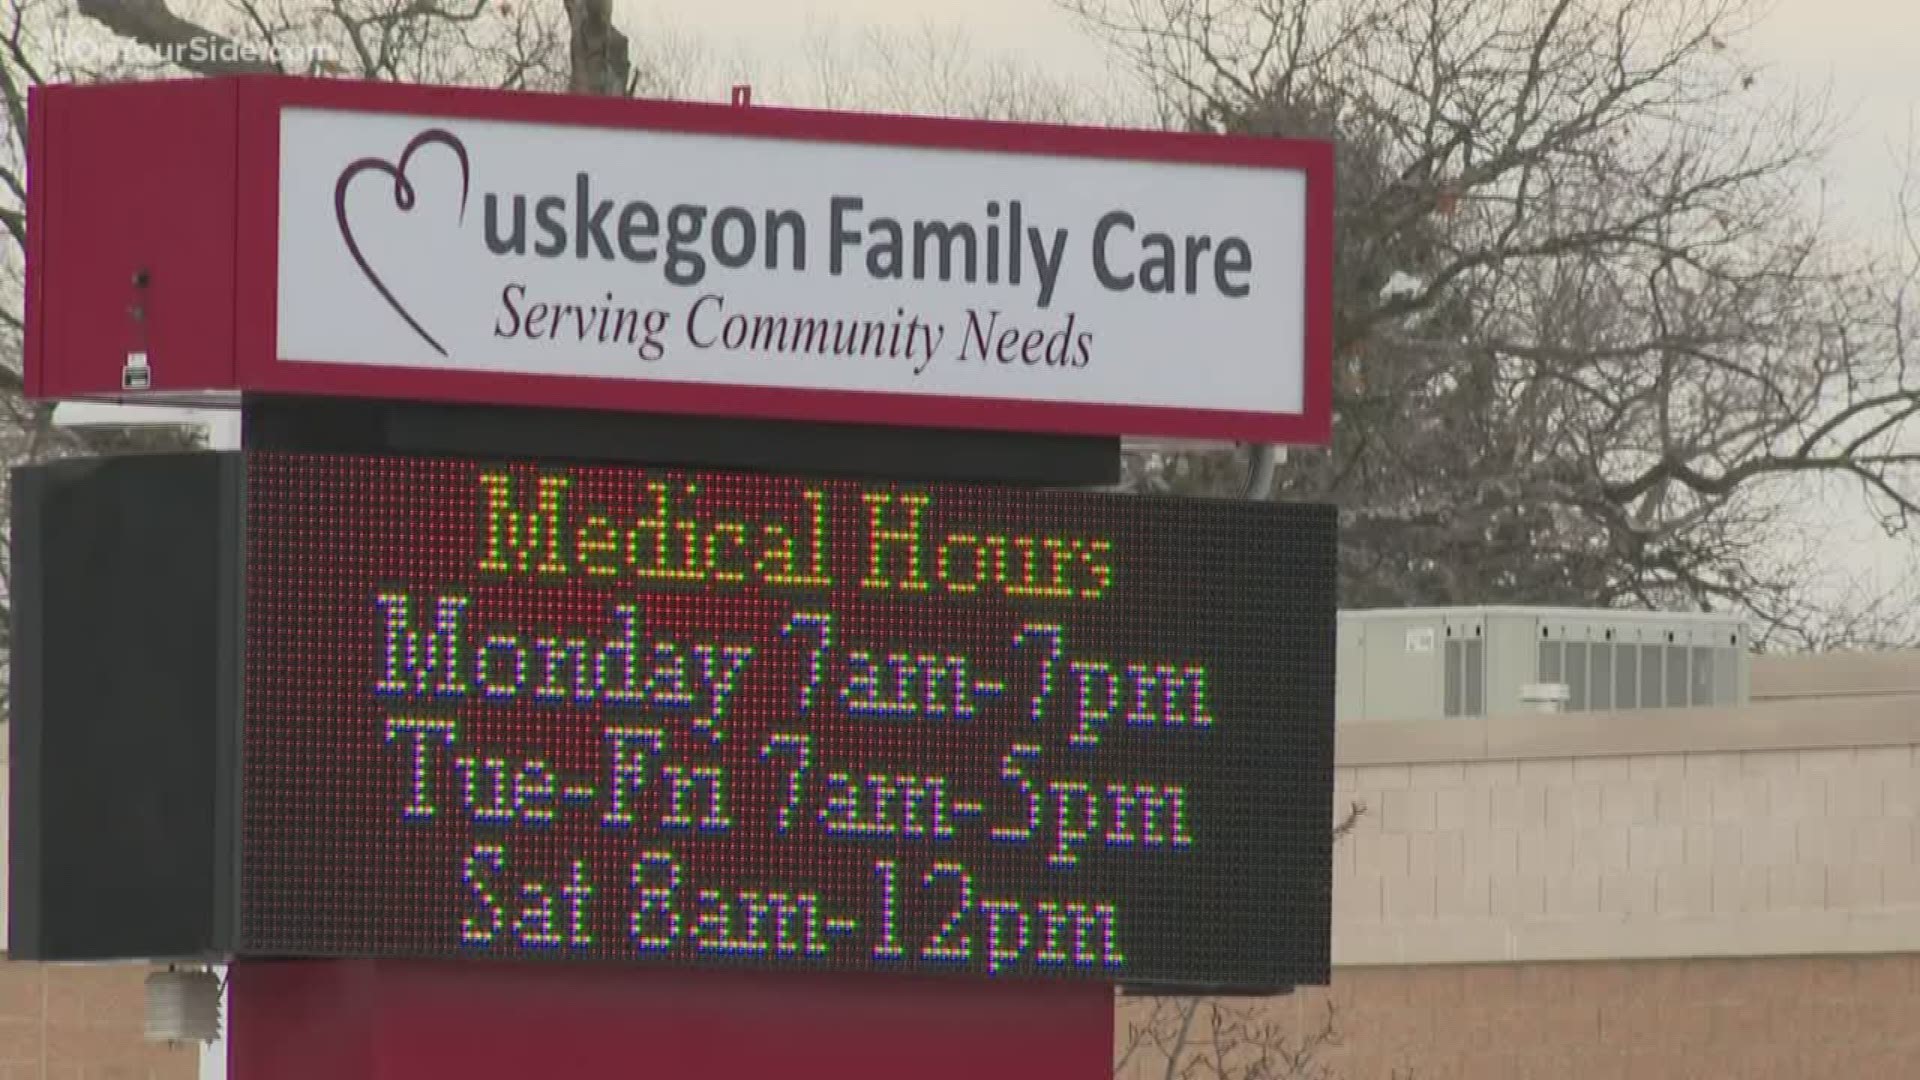 Hackley Community Care and HealthWest are ready to provide care for some of Muskegon Family Care's patients.